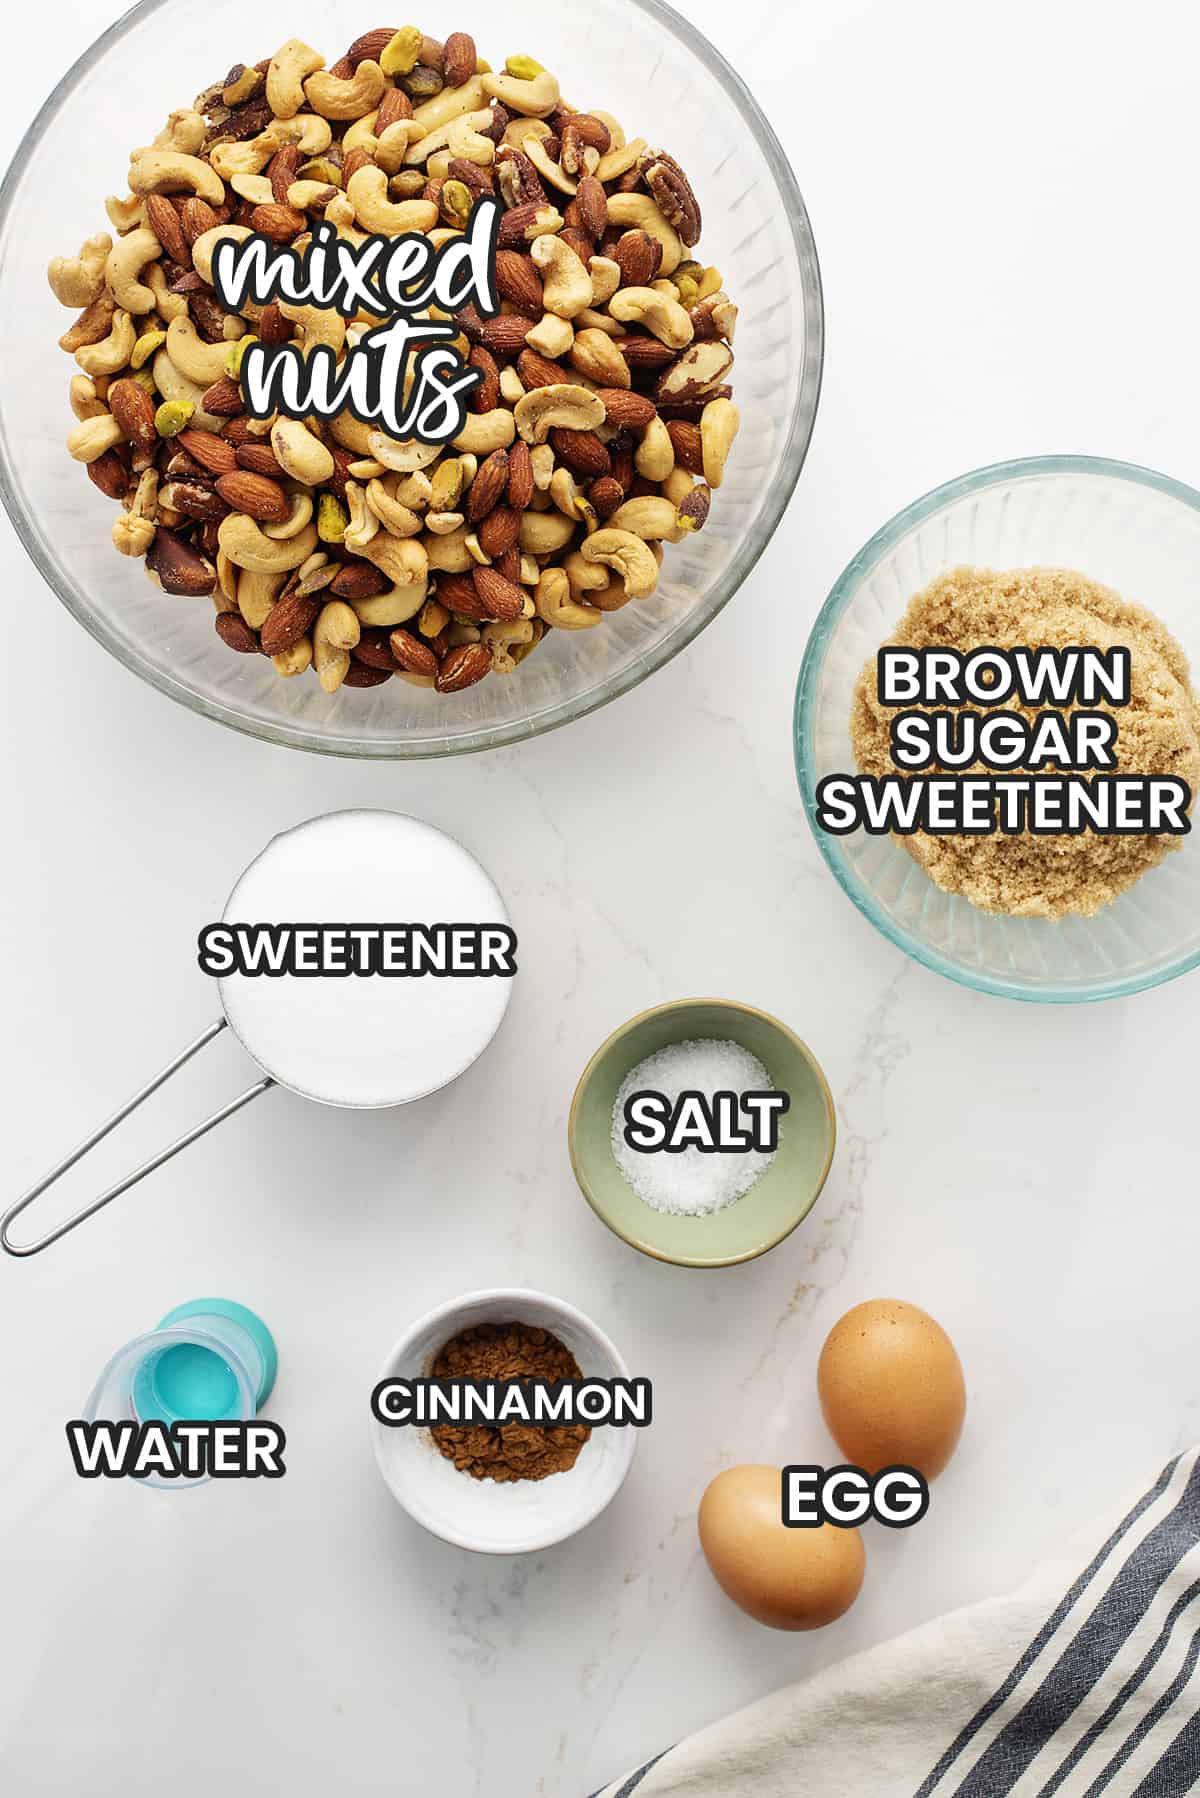 Ingredients for keto candied nuts.